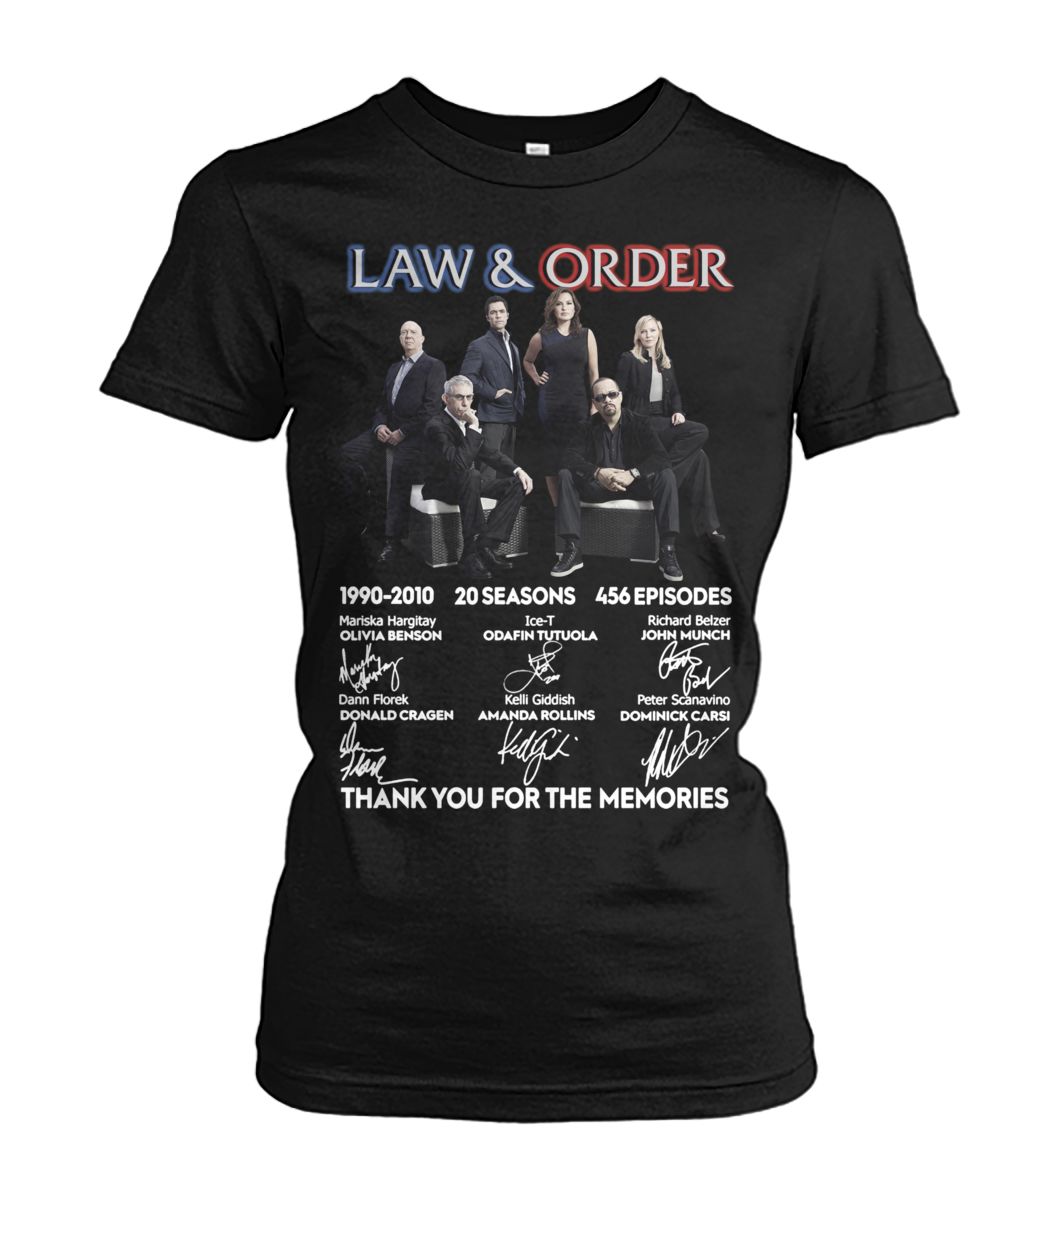 Law and order tv show 1990 2010 20 seasons 456 episodes thank you for memories signatures women's crew tee